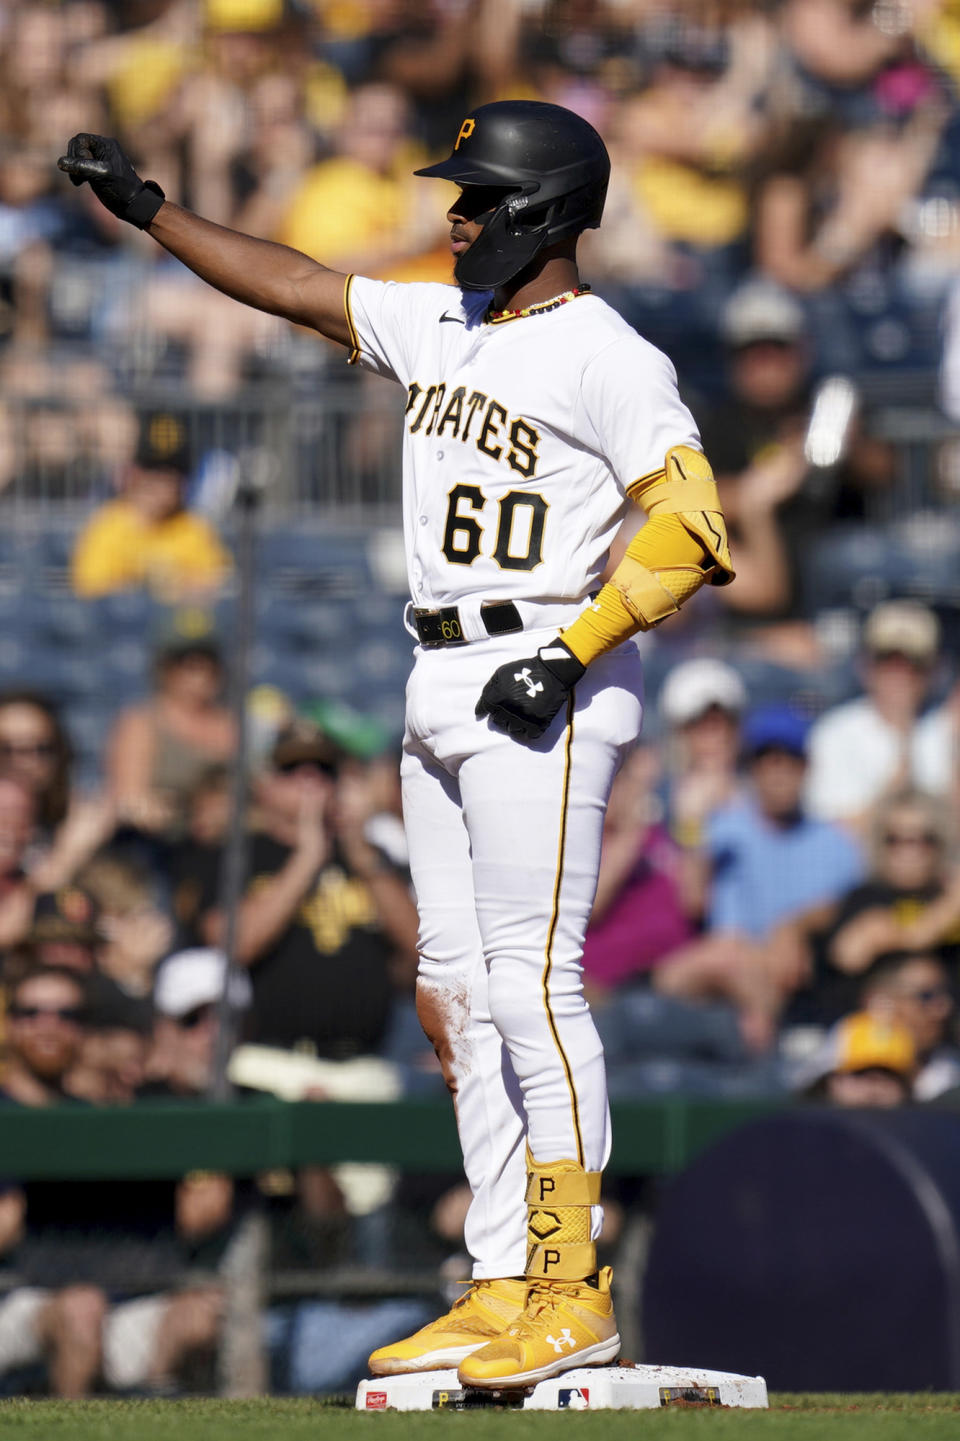 Pittsburgh Pirates' Liover Peguero reacts after hitting a triple against the Miami Marlins during the second inning of a baseball game in Pittsburgh, Sunday, Oct. 1, 2023. (AP Photo/Matt Freed)